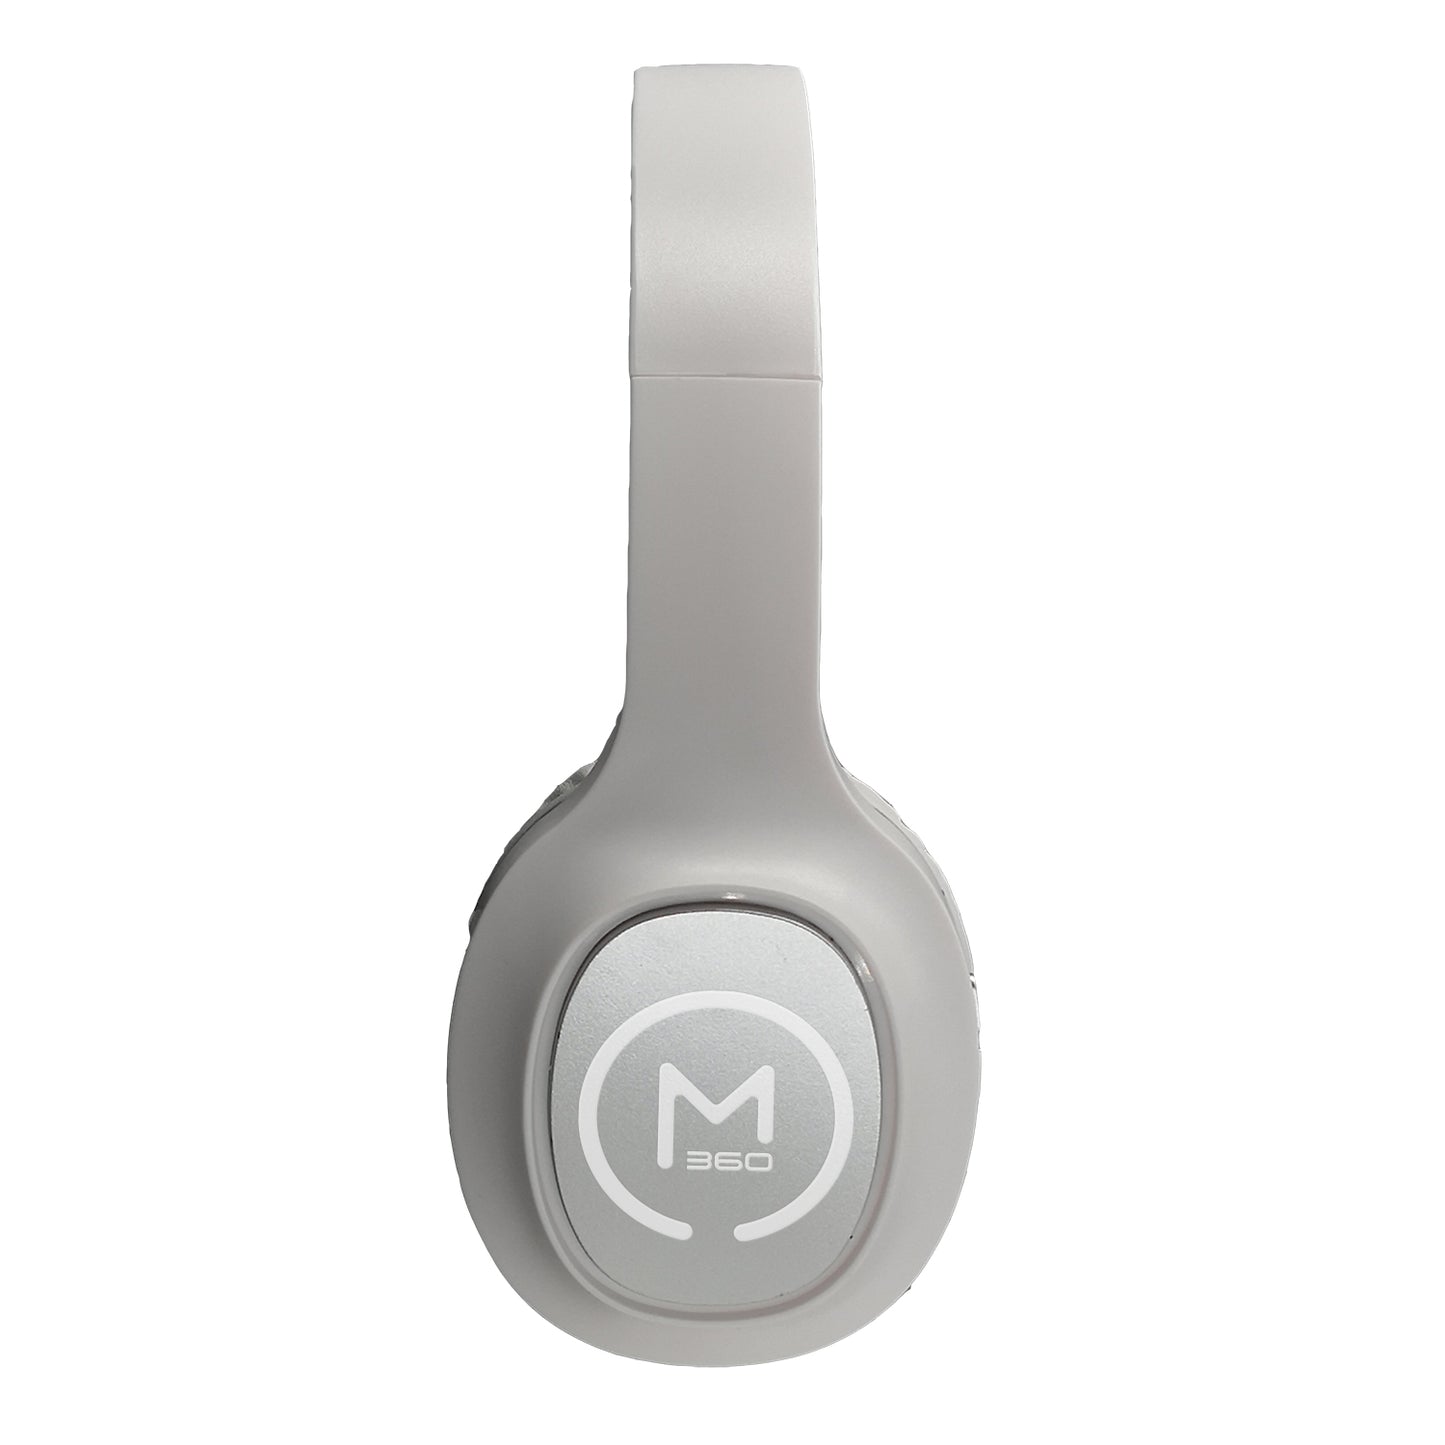 Photo of Morpheus 360 Tremors Wireless on-ear Headphones – White with Silver accents, side view.